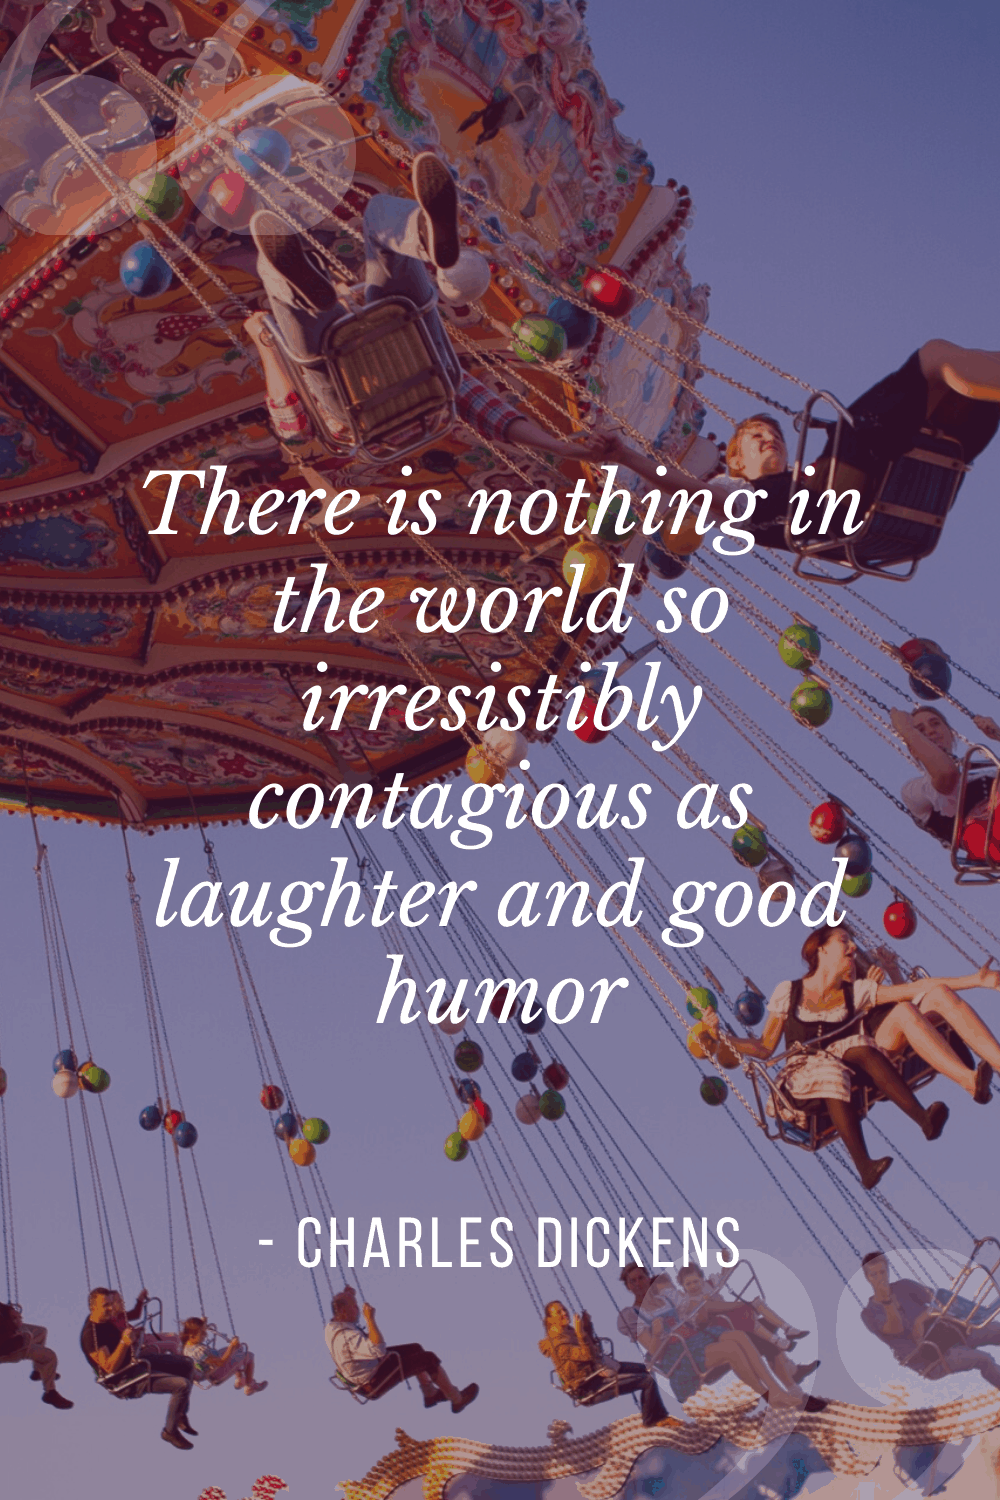 “There is nothing in the world so irresistibly contagious as laughter and good humor”, Charles Dickens